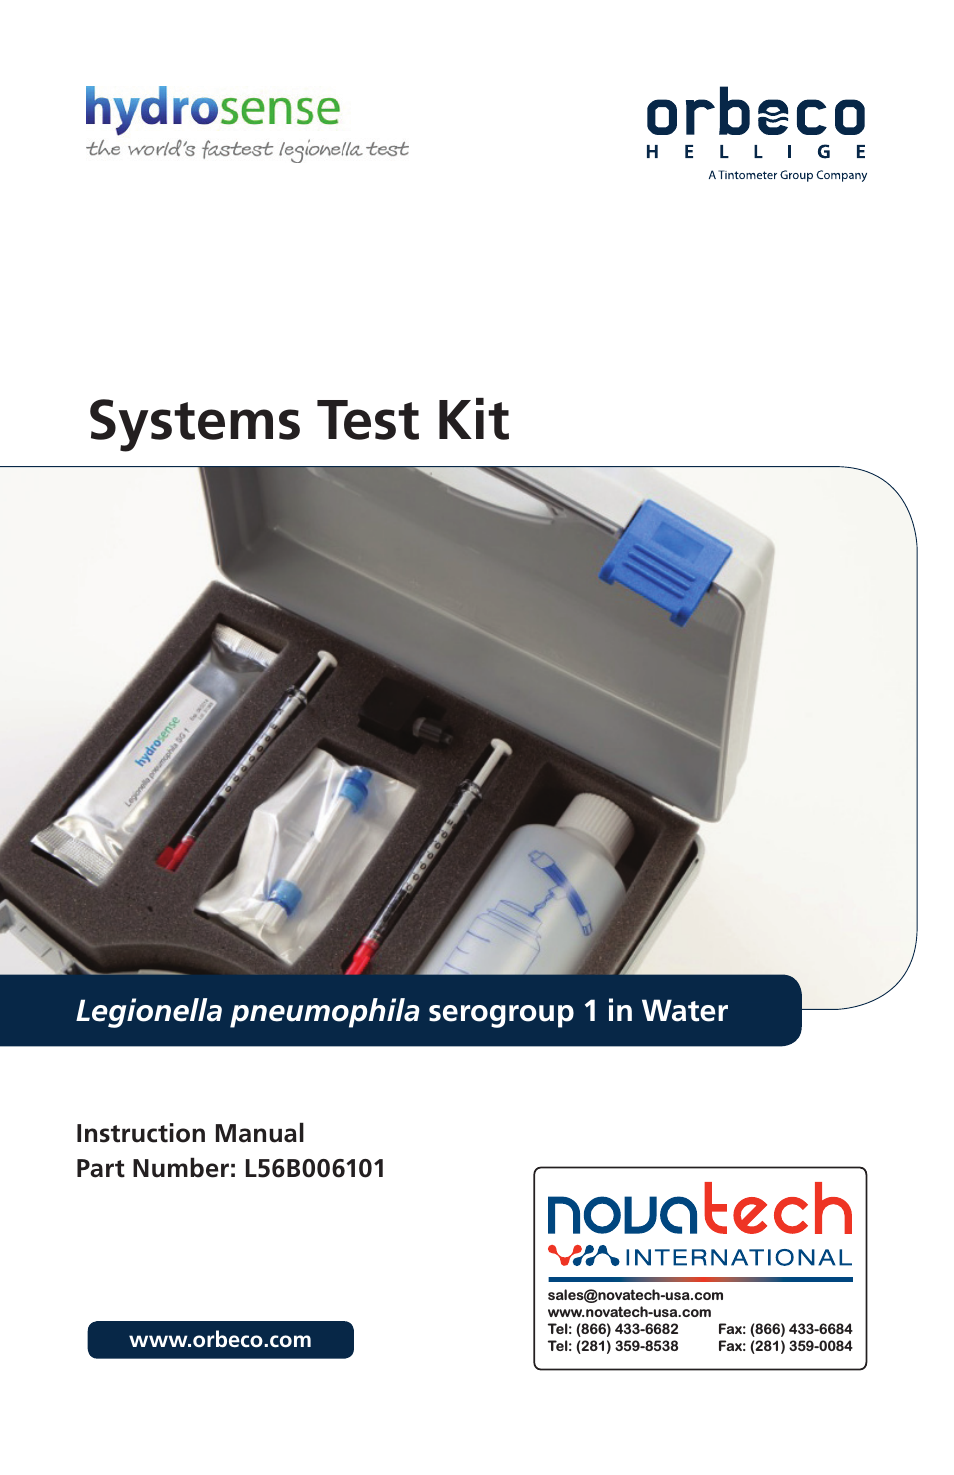 Orbeco-Hellige Legionella Systems Test Kit